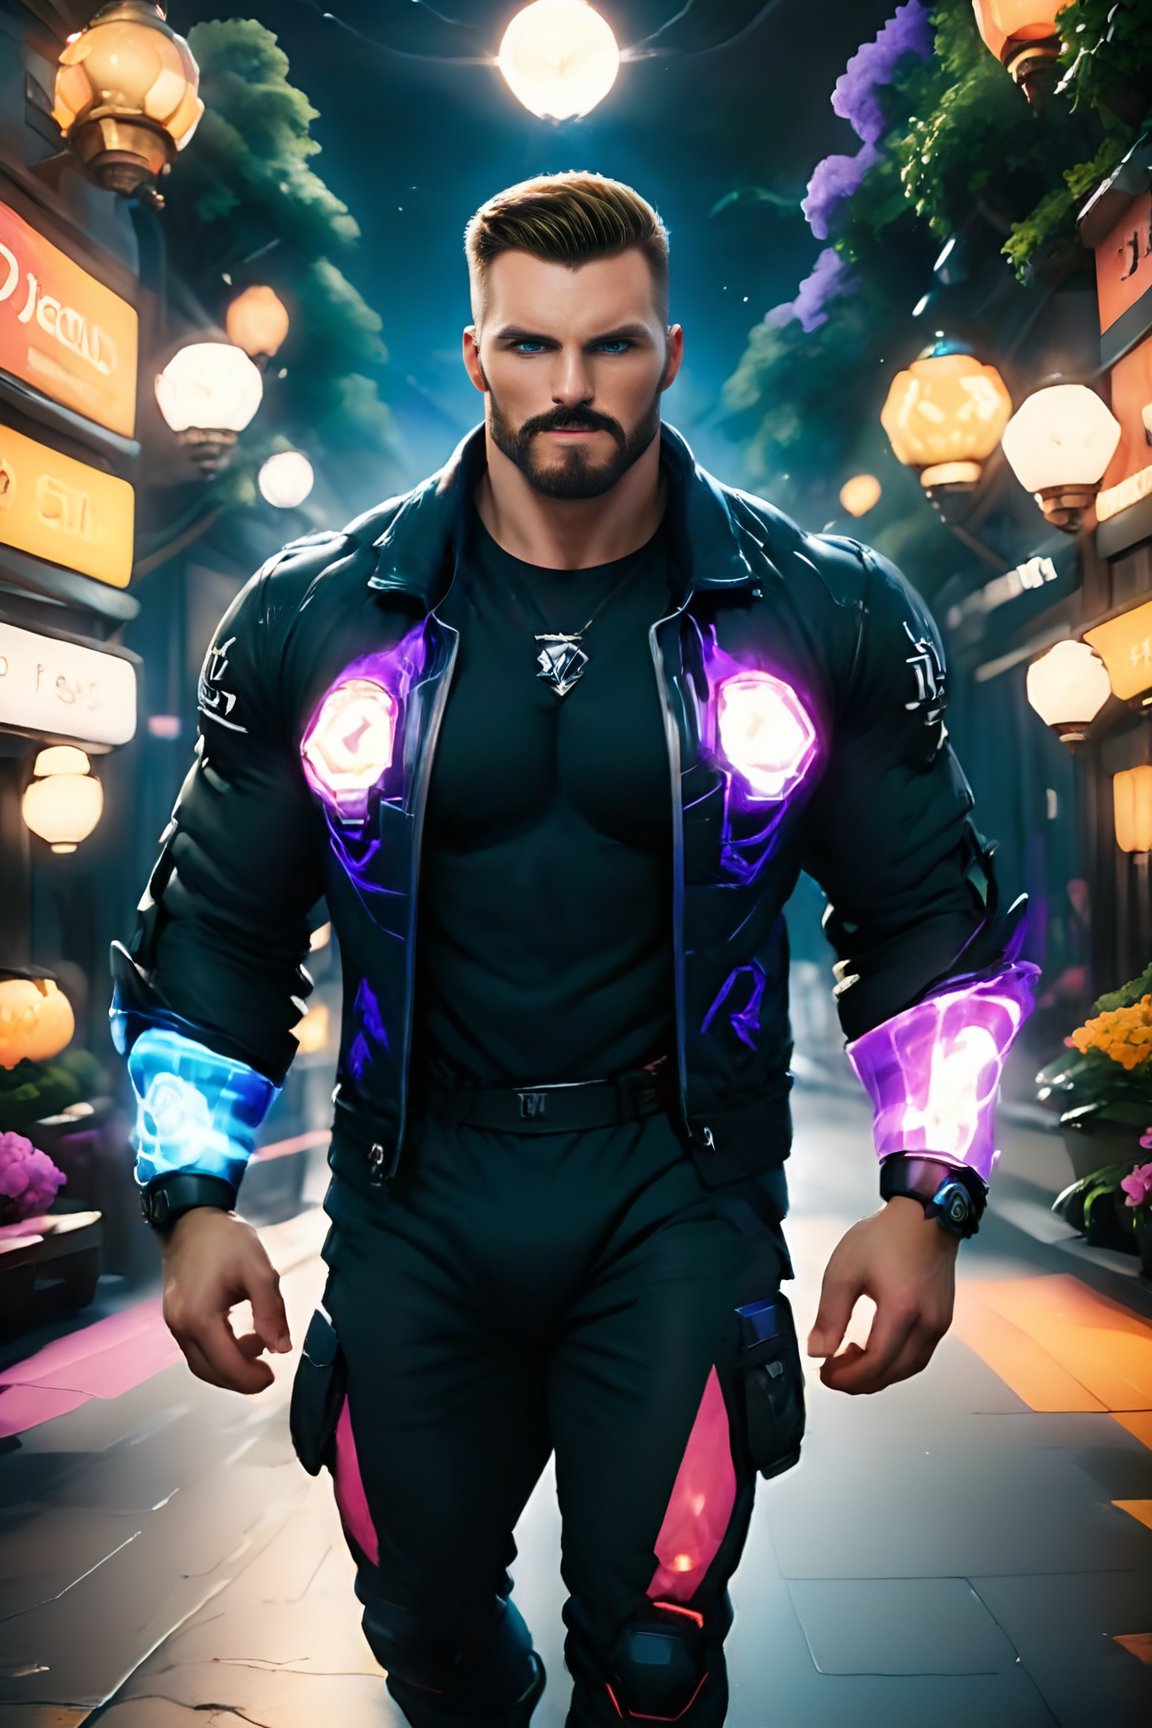 In this Unreal Engine 5 masterpiece, the telepath stands center frame, his piercing blue eyes ablaze with semi-translucent lightbeams that radiate an otherworldly energy. His powerful gaze is reinforced by prominent cheekbones and a sharp jawline, defined by his brown beard. The focal point of the scene is his intense expression, as if commanding the viewer's mind. He wears a majestic purple illusionist jacket that refracts light through ray-tracing refractions, adding depth to the composition. The backdrop is a breathtakingly colorful, psychedelic forest, where lost trees twist and writhe in a mesmerizing dance of shadows and light. A powerful vignette seals off the borders, drawing the viewer's attention to the telepath's commanding presence, as if daring them not to succumb to his mind-controlling gaze.